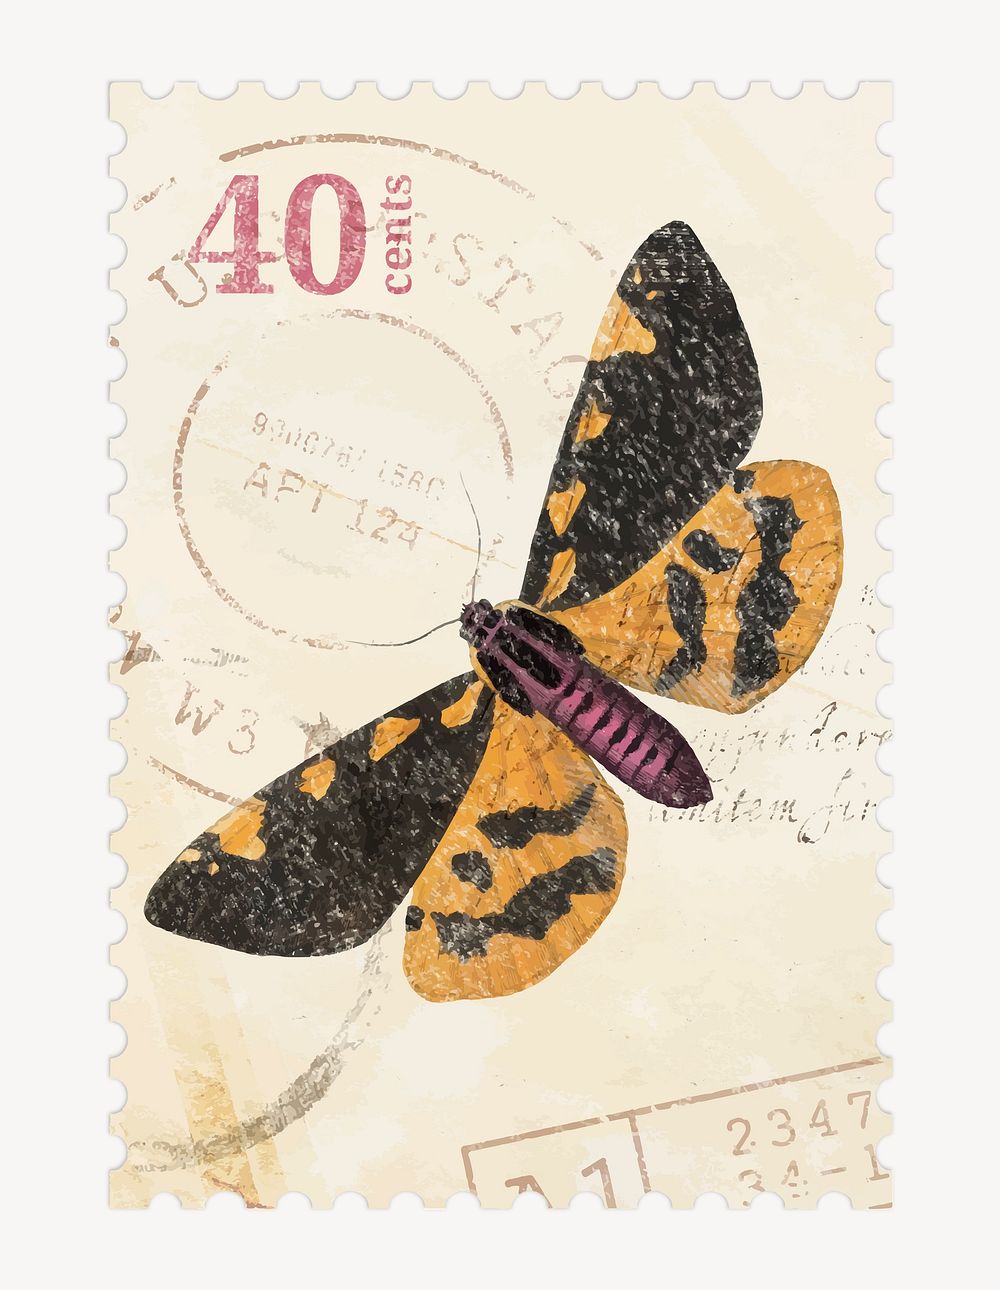 Butterfly postage stamp graphic, aesthetic illustration vector